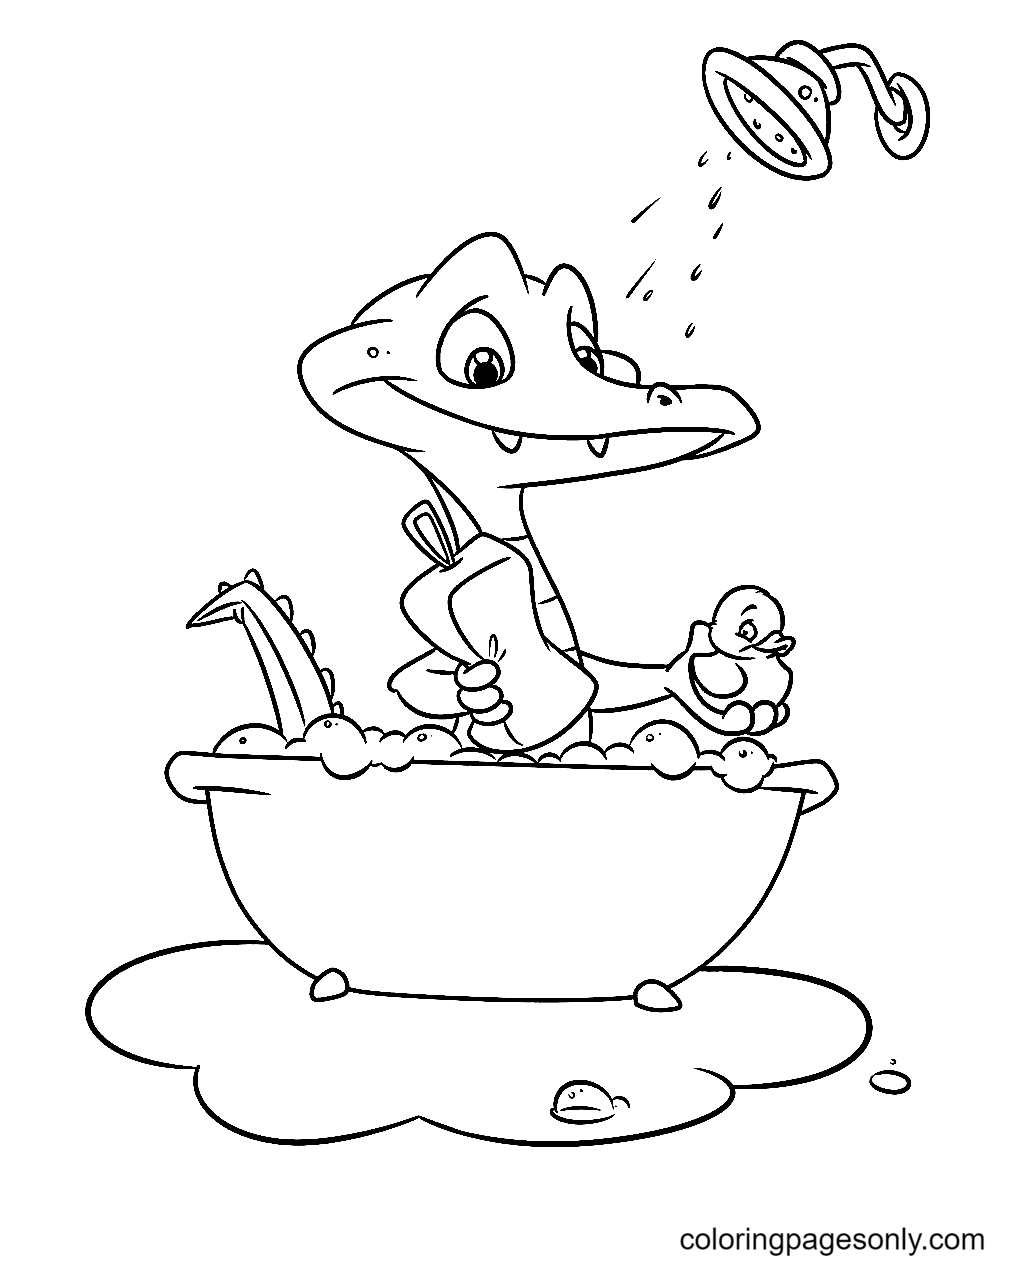 Little Alligator Swims Bathroom Coloring Page